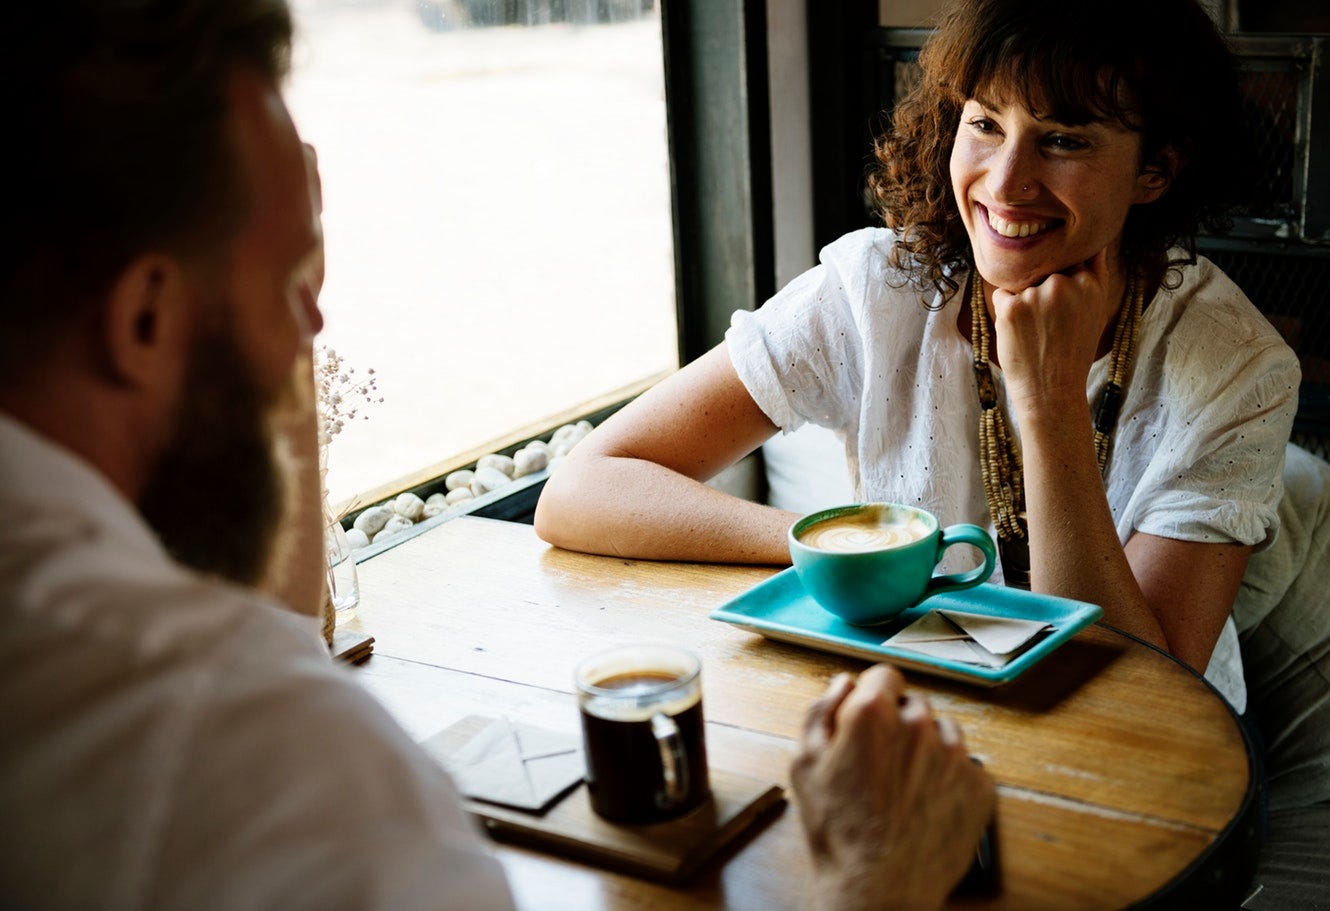 How to Turn Small Talk into Smart Conversation